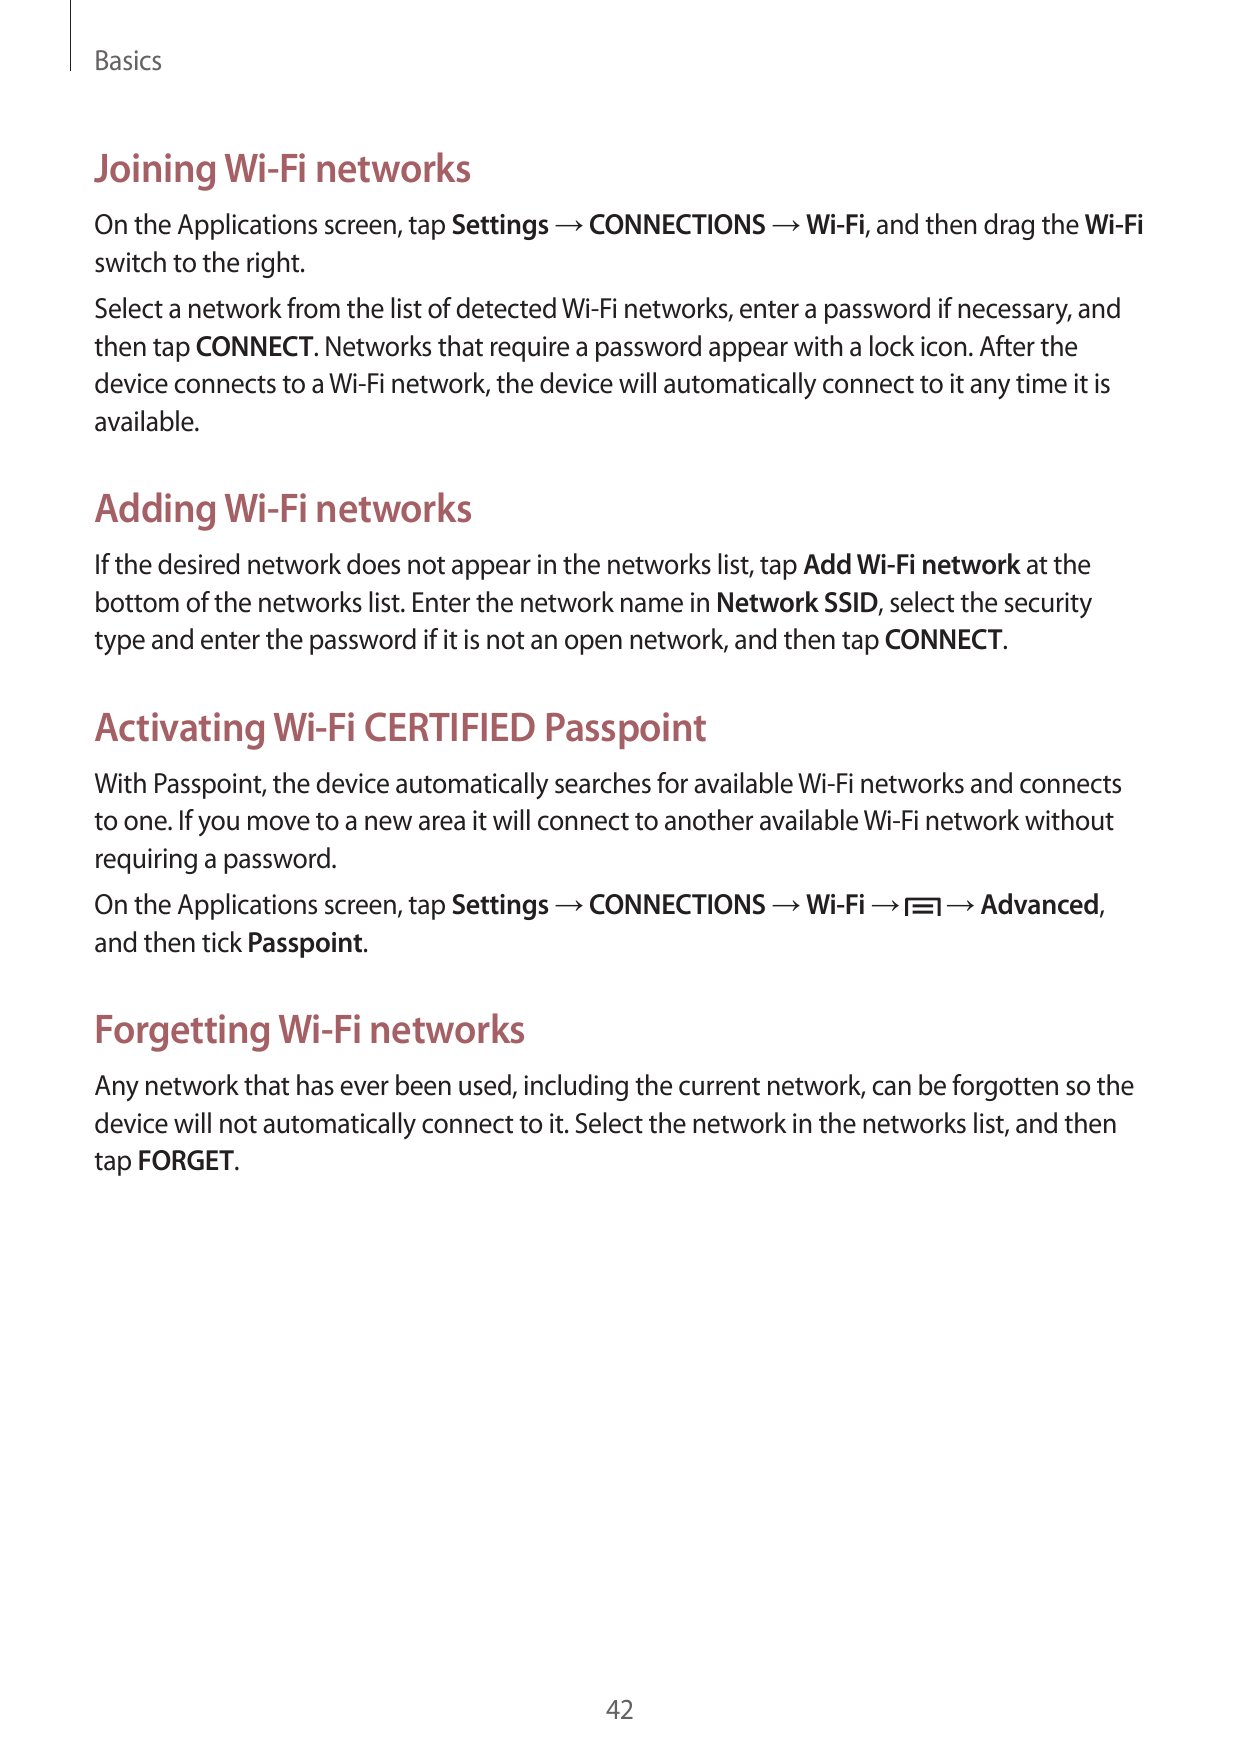 BasicsJoining Wi-Fi networksOn the Applications screen, tap Settings → CONNECTIONS → Wi-Fi, and then drag the Wi-Fiswitch to the